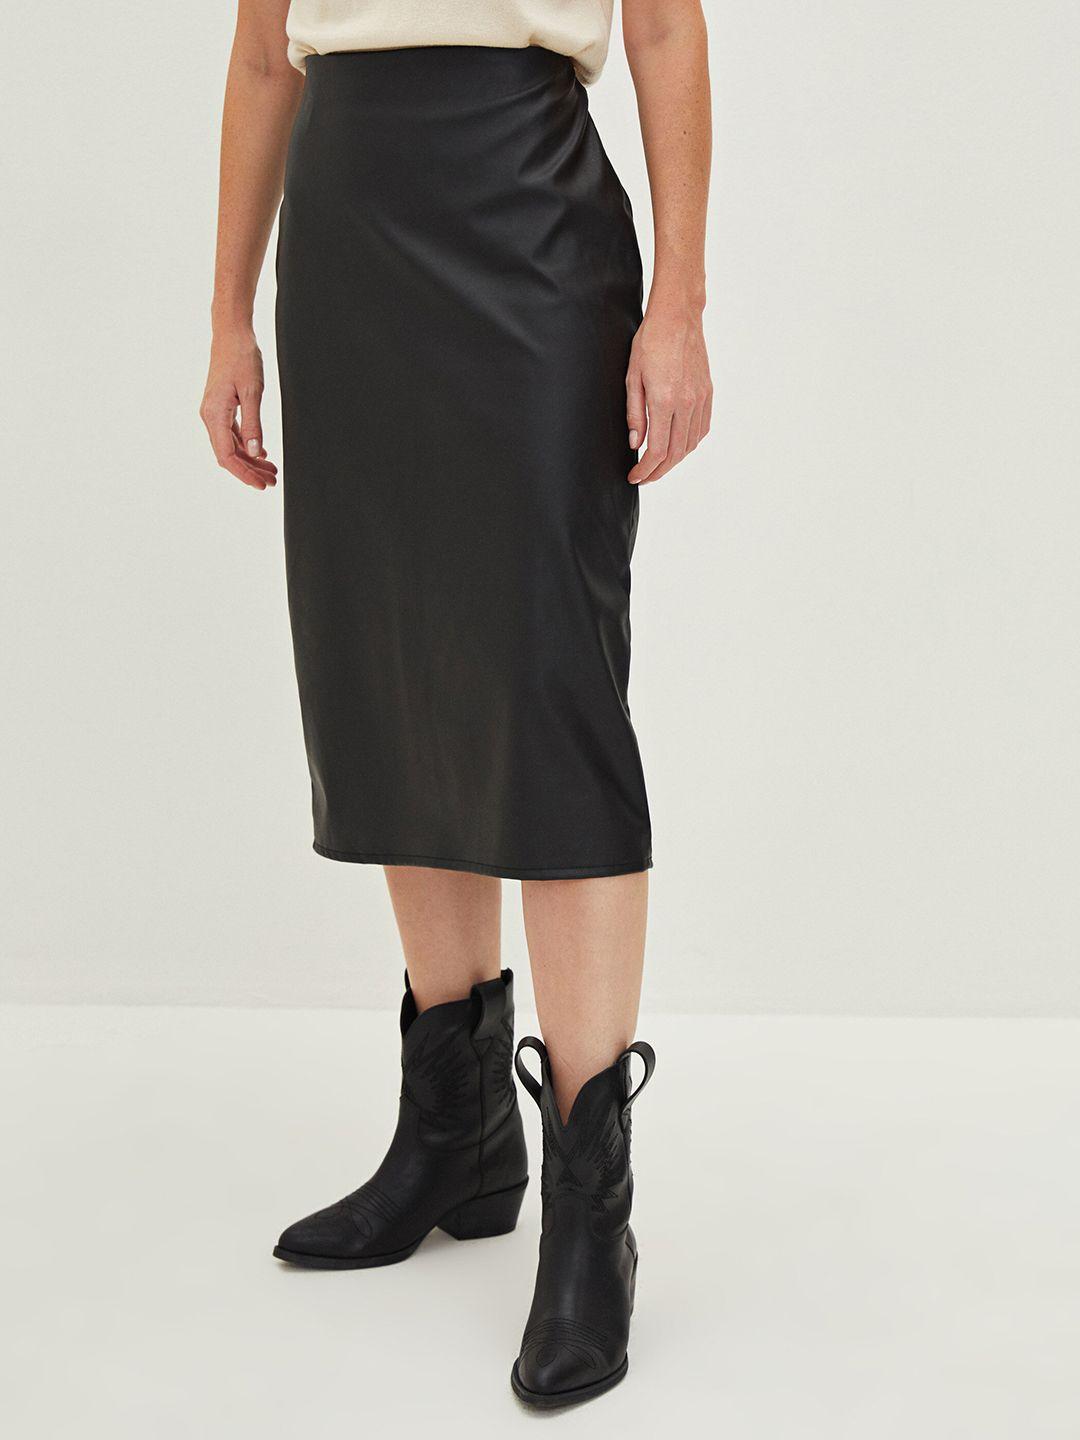 lc-waikiki-black-solid-high-waist-slim-fit-faux-leather-pencil-skirt